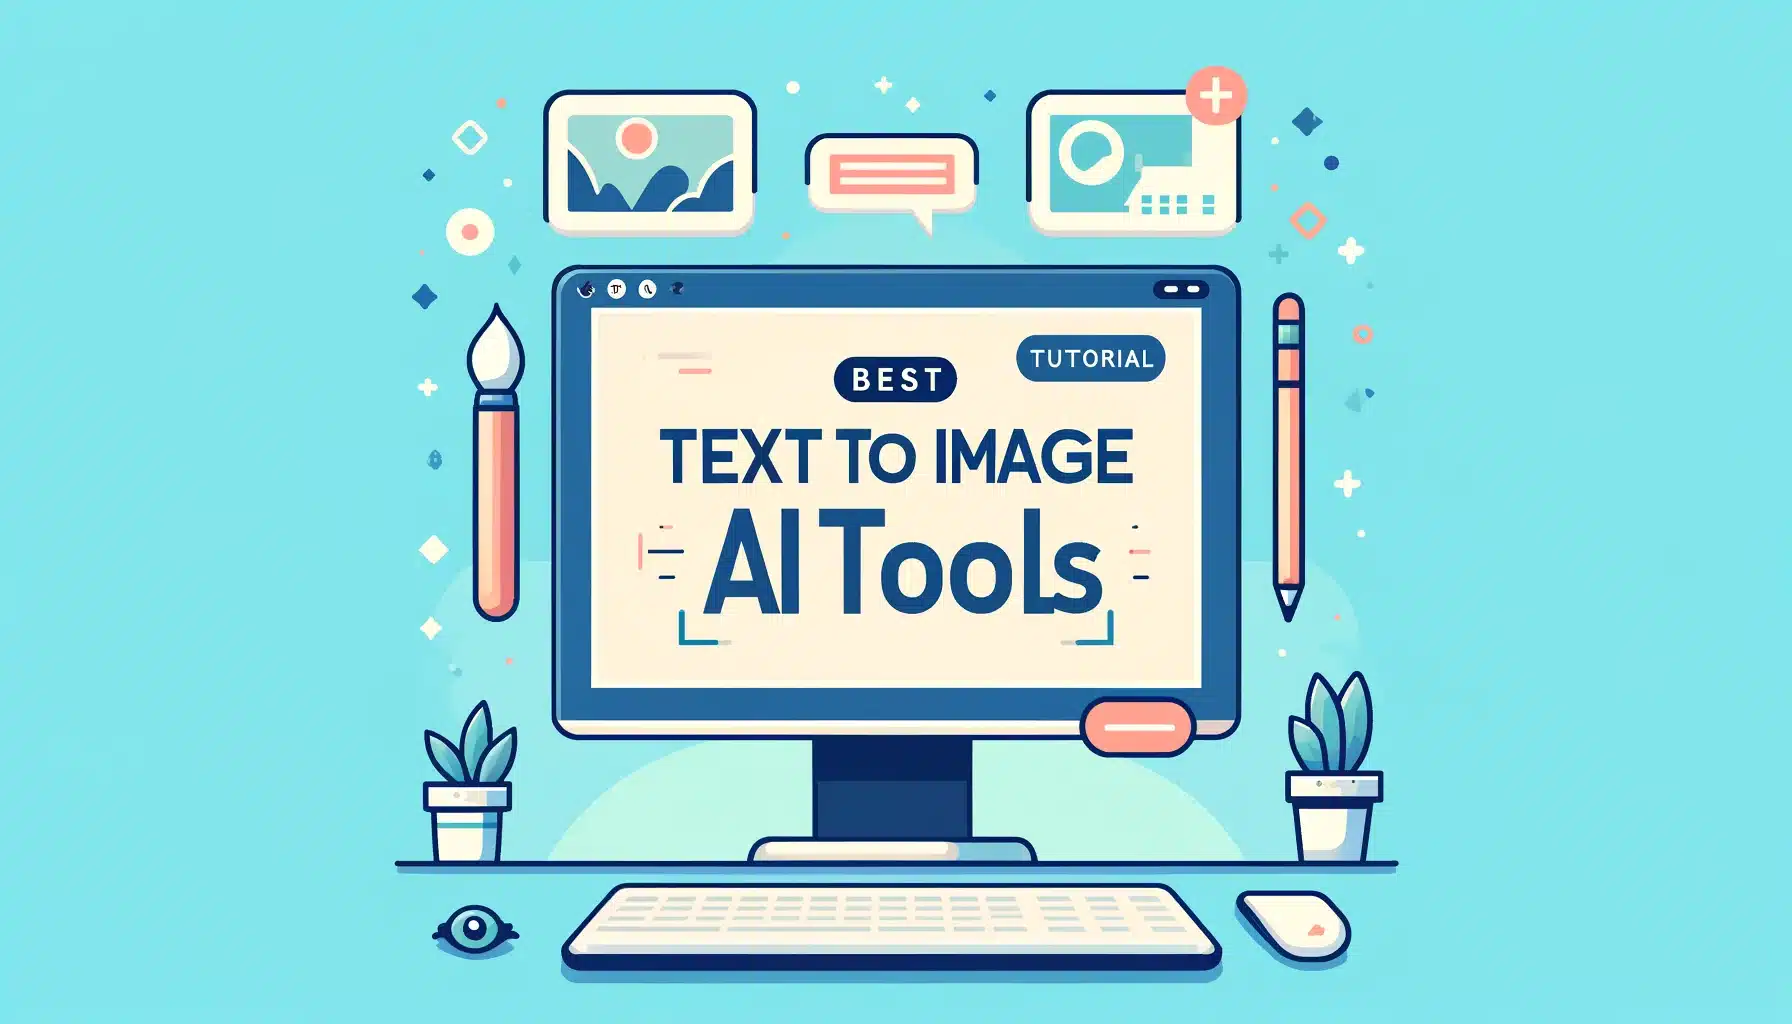 Adobe firefly Best text to image AI tools result